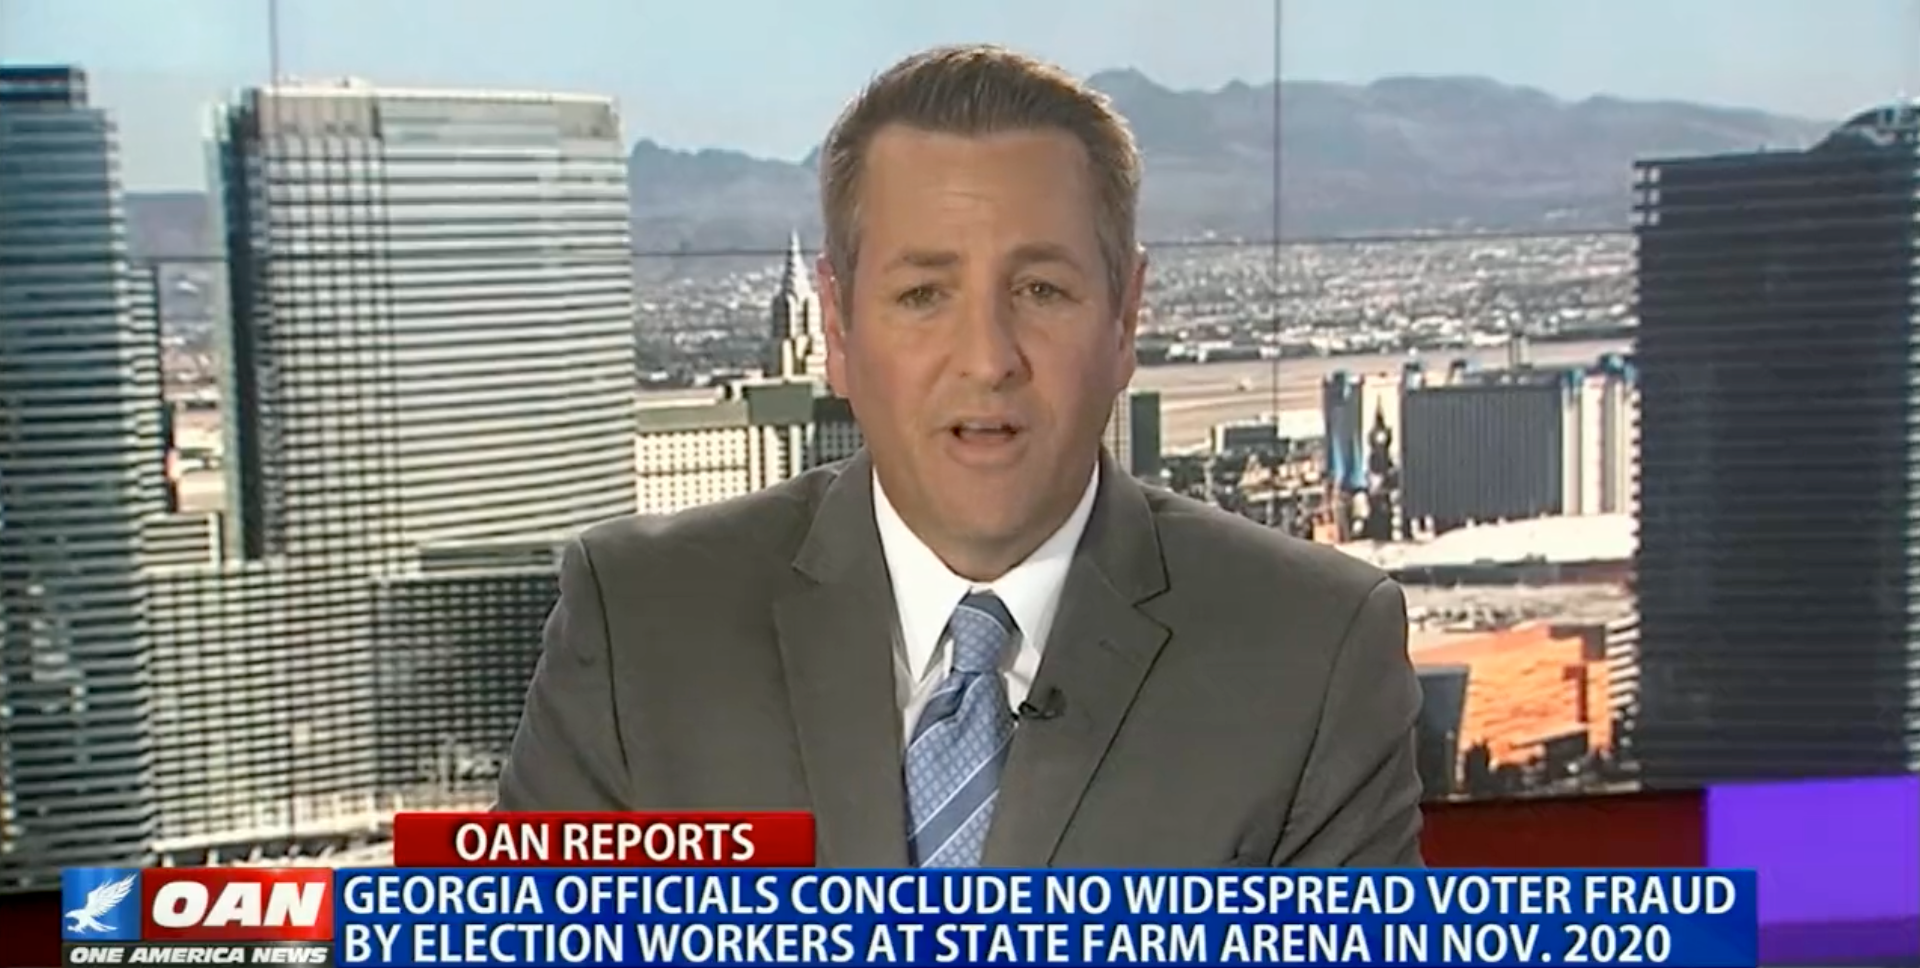 OAN segment acknowledging ‘no widespread voter fraud’ in 2020 election